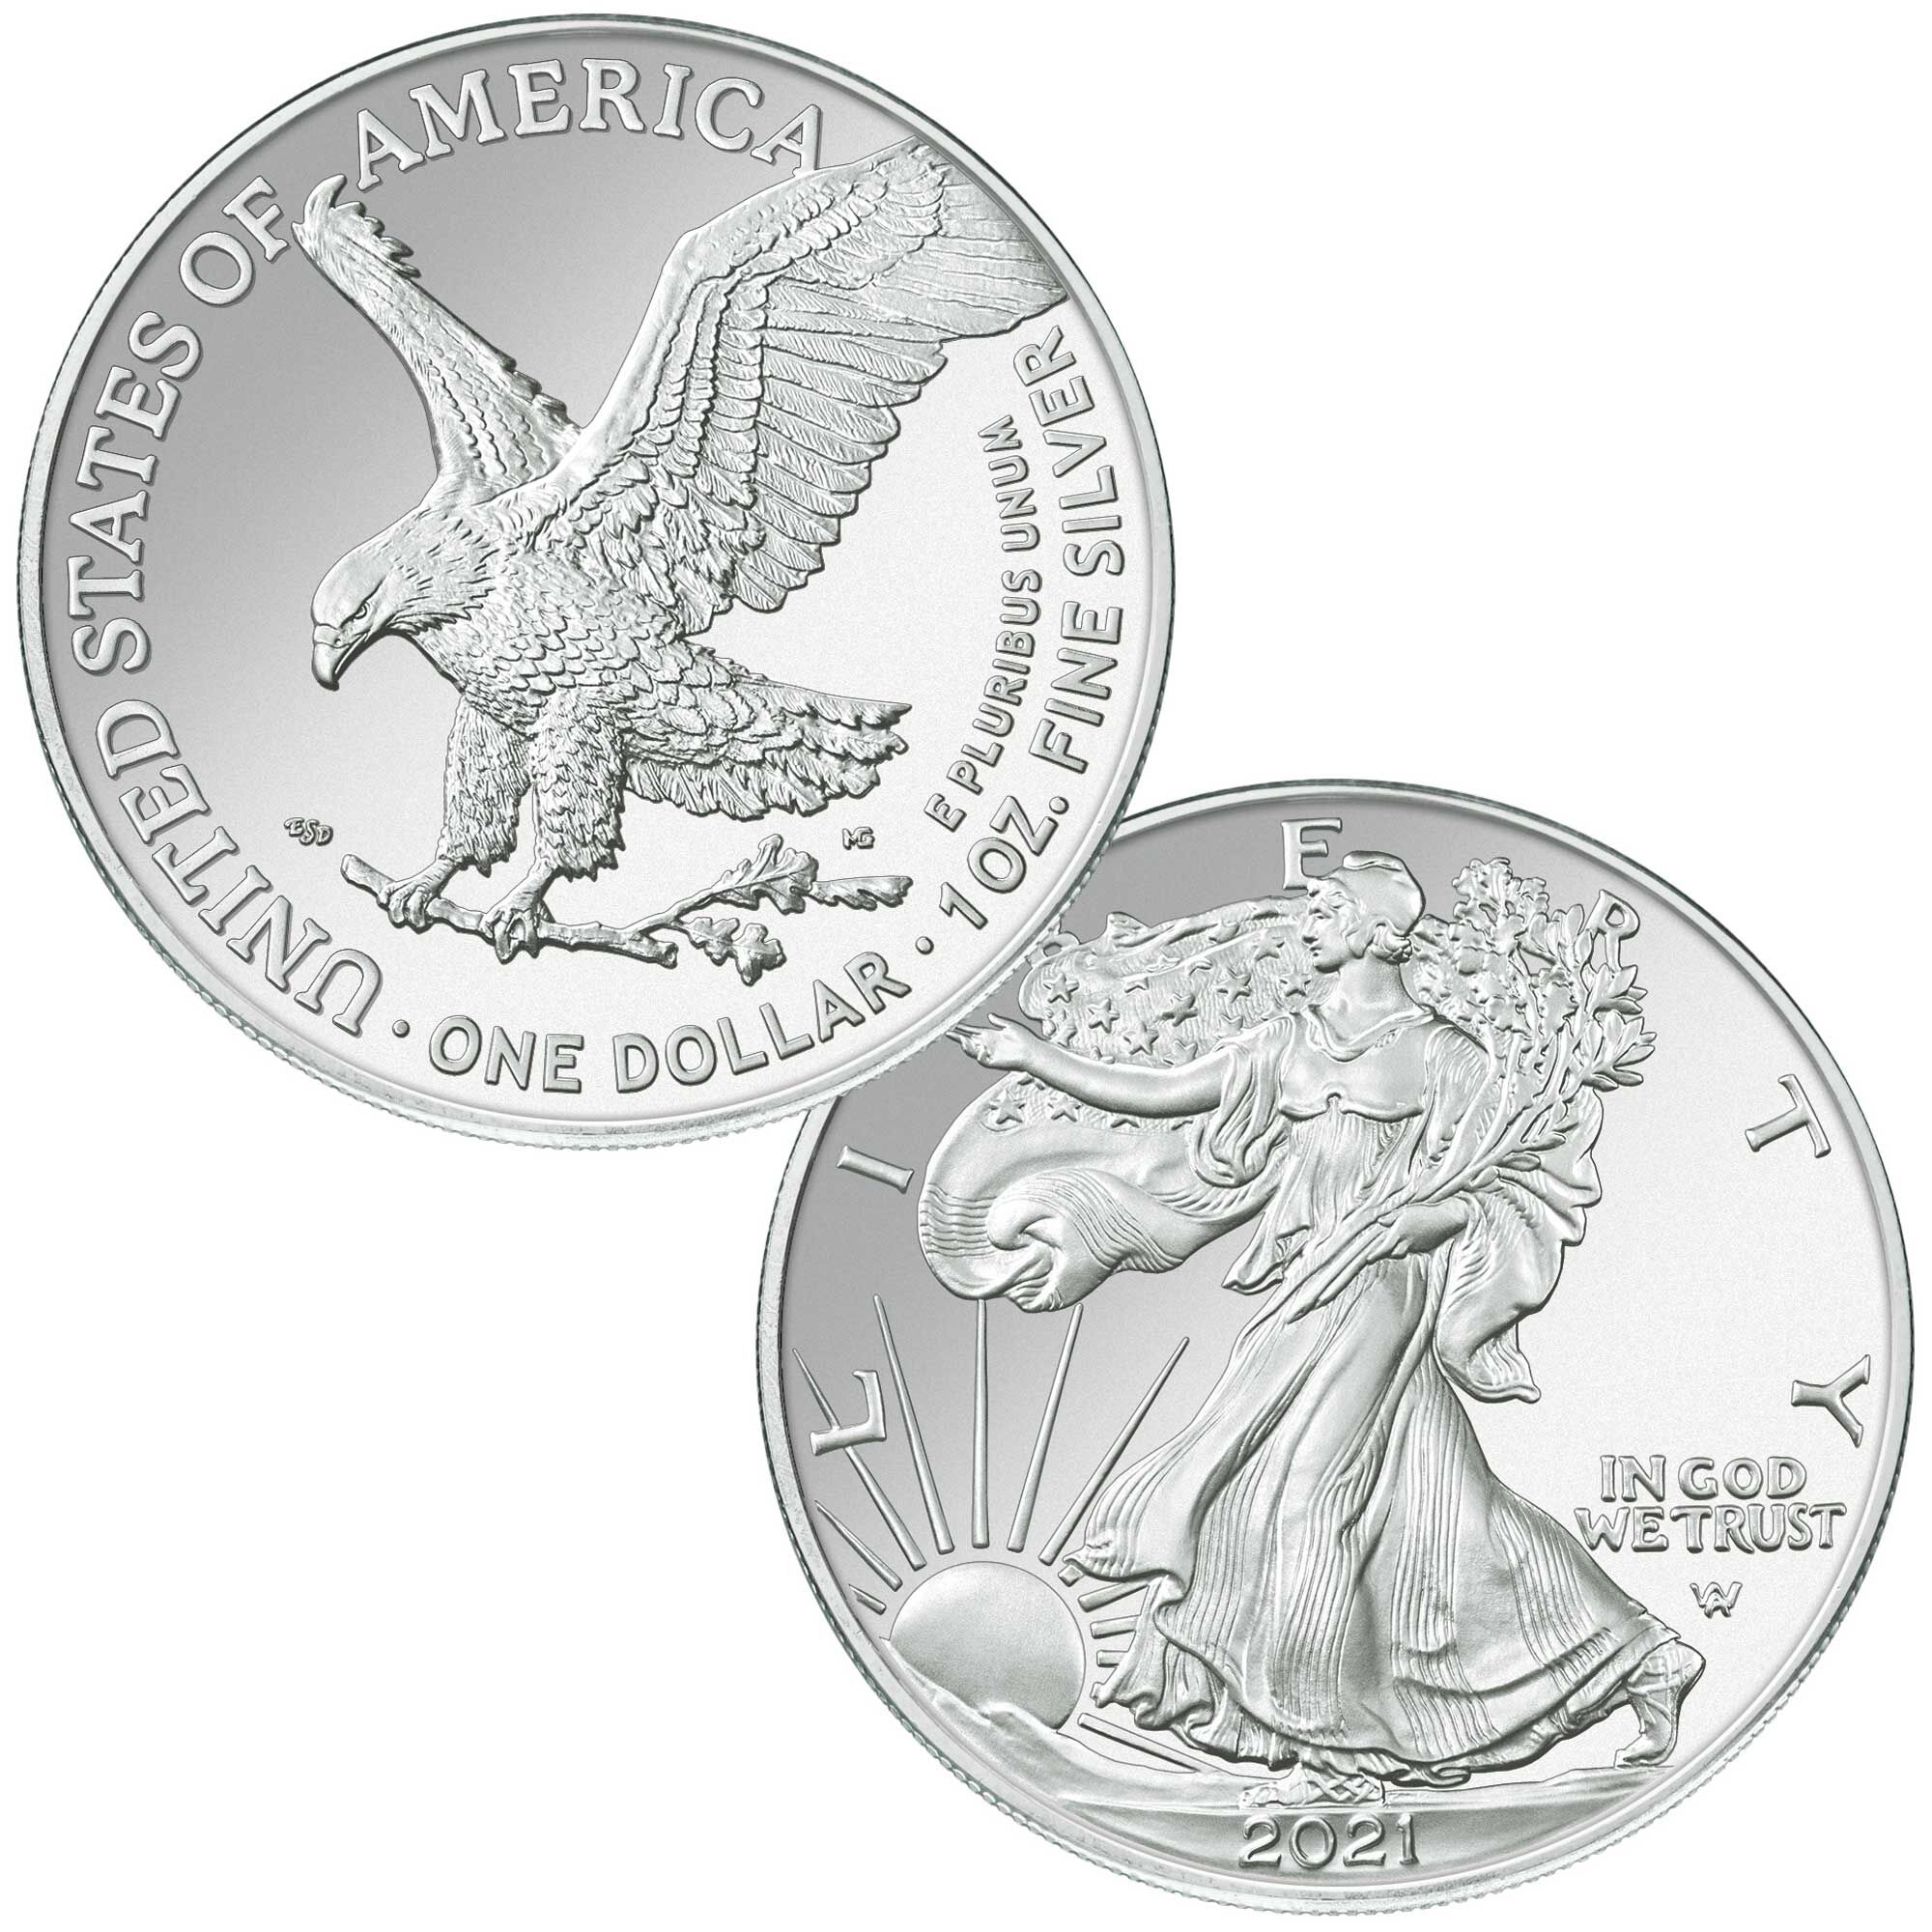 complete set of 2021 american eagle silver dollars EON c Coin